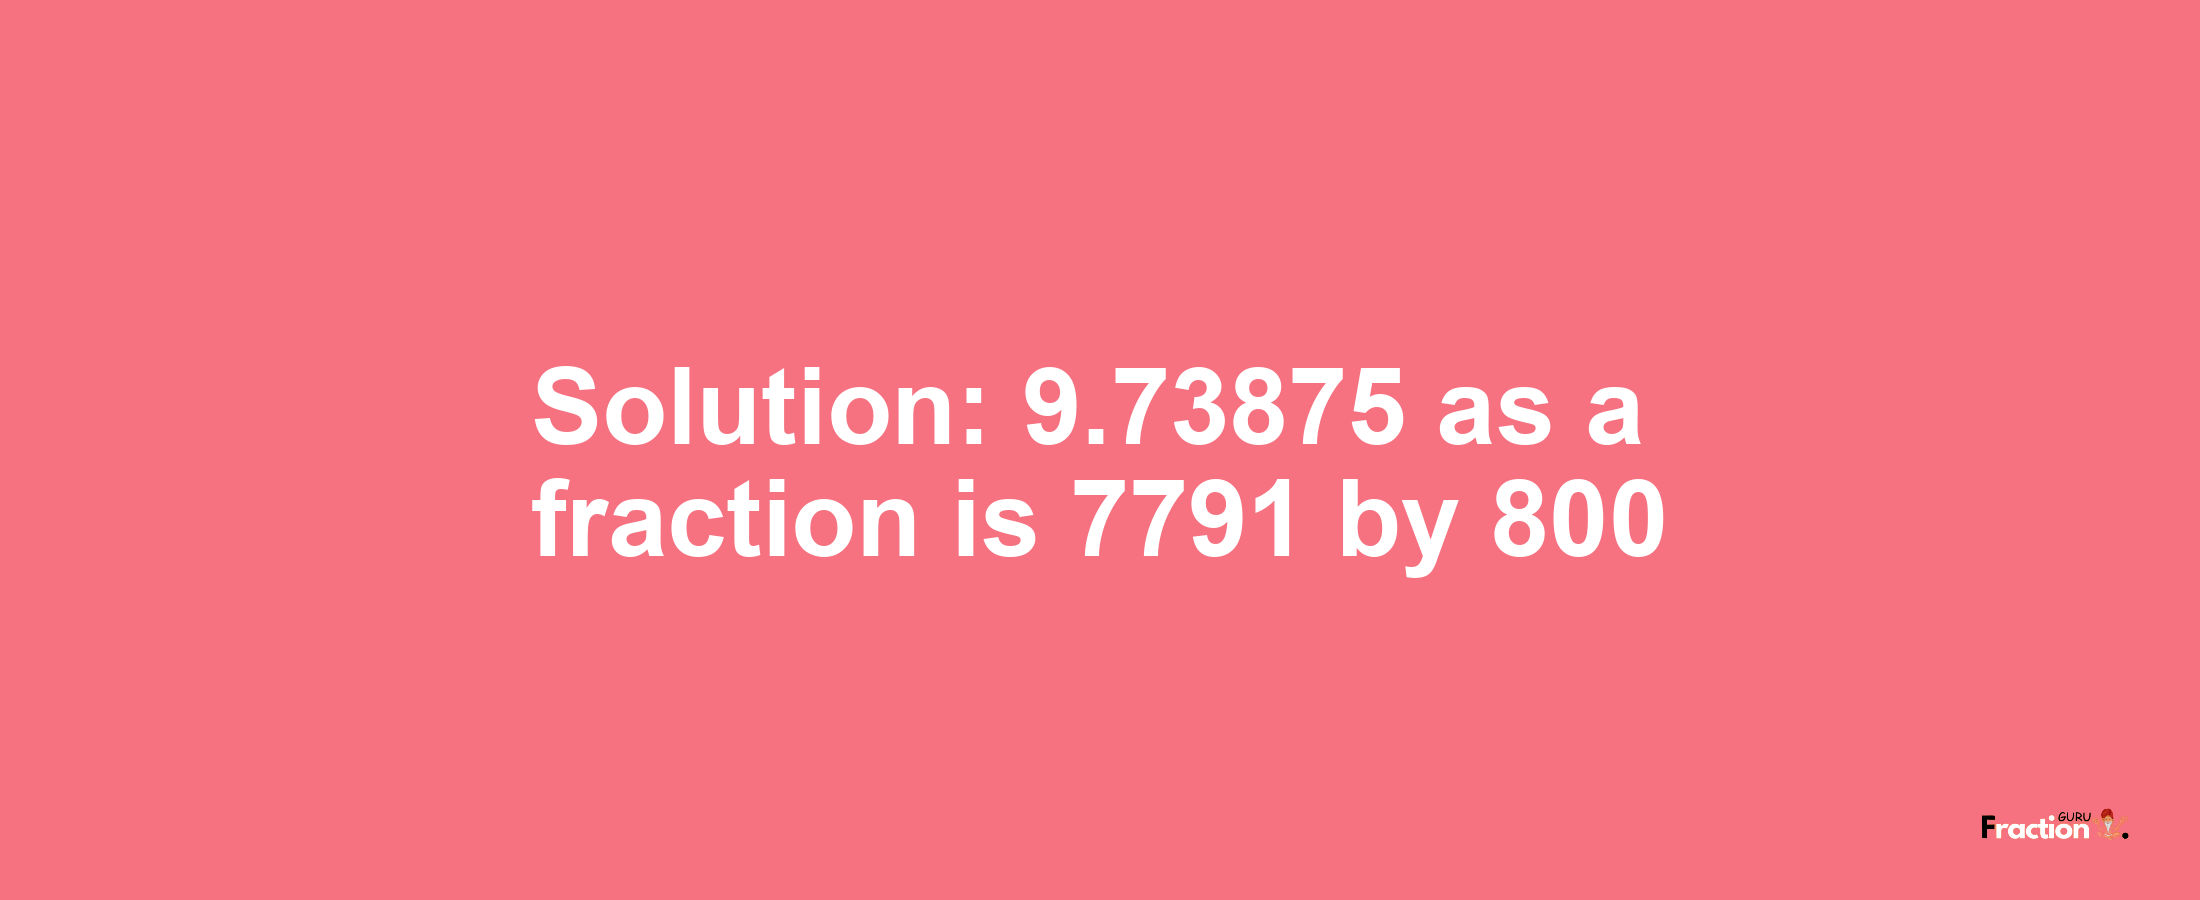 Solution:9.73875 as a fraction is 7791/800